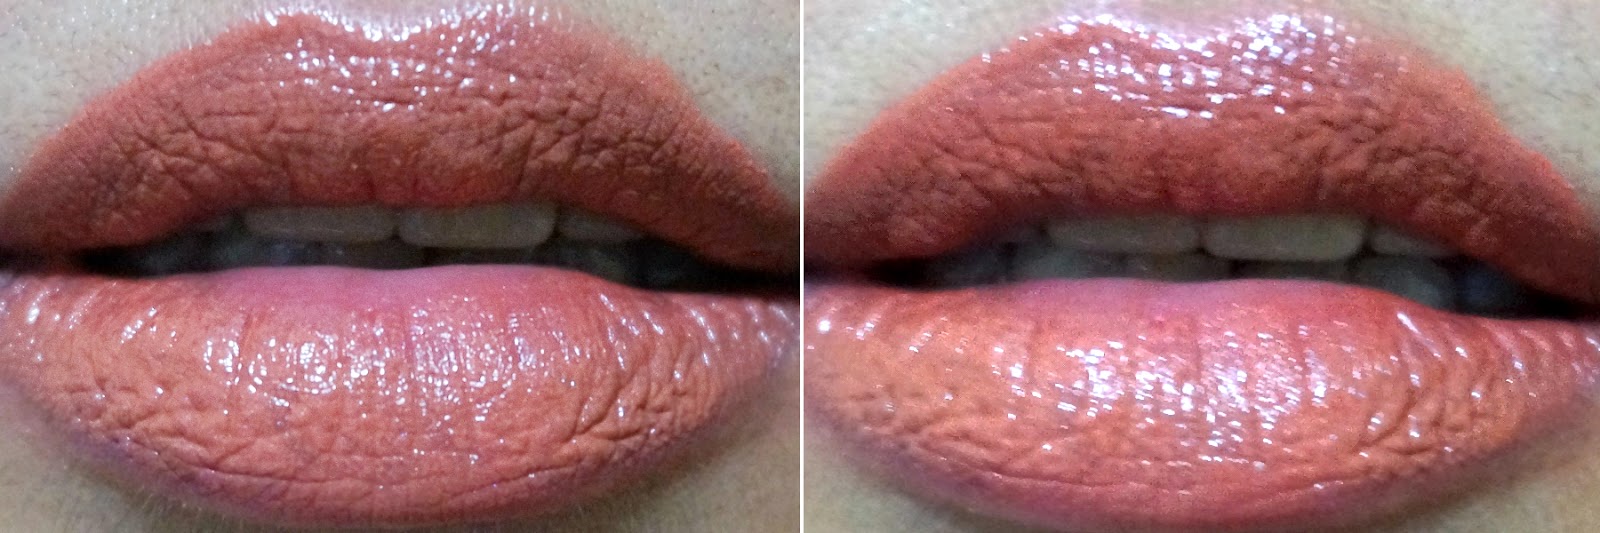 Lip Swatch: Maybelline Color Sensational Lipstick in Toffee Cream